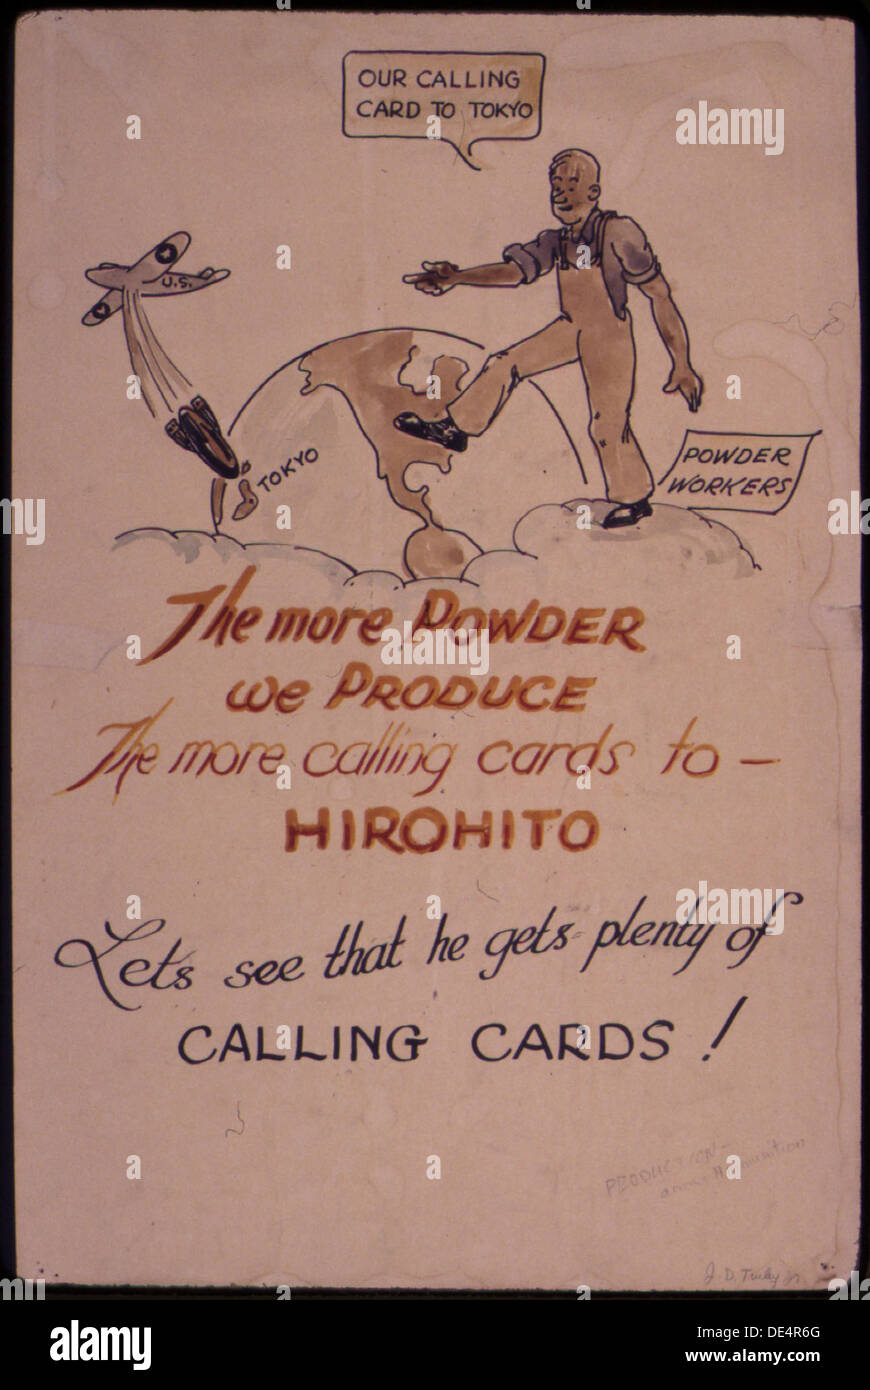 The more power we produce the more calling cards to - Hirohito. Let's see that he gets plenty of calling cards 5E 534748 Stock Photo